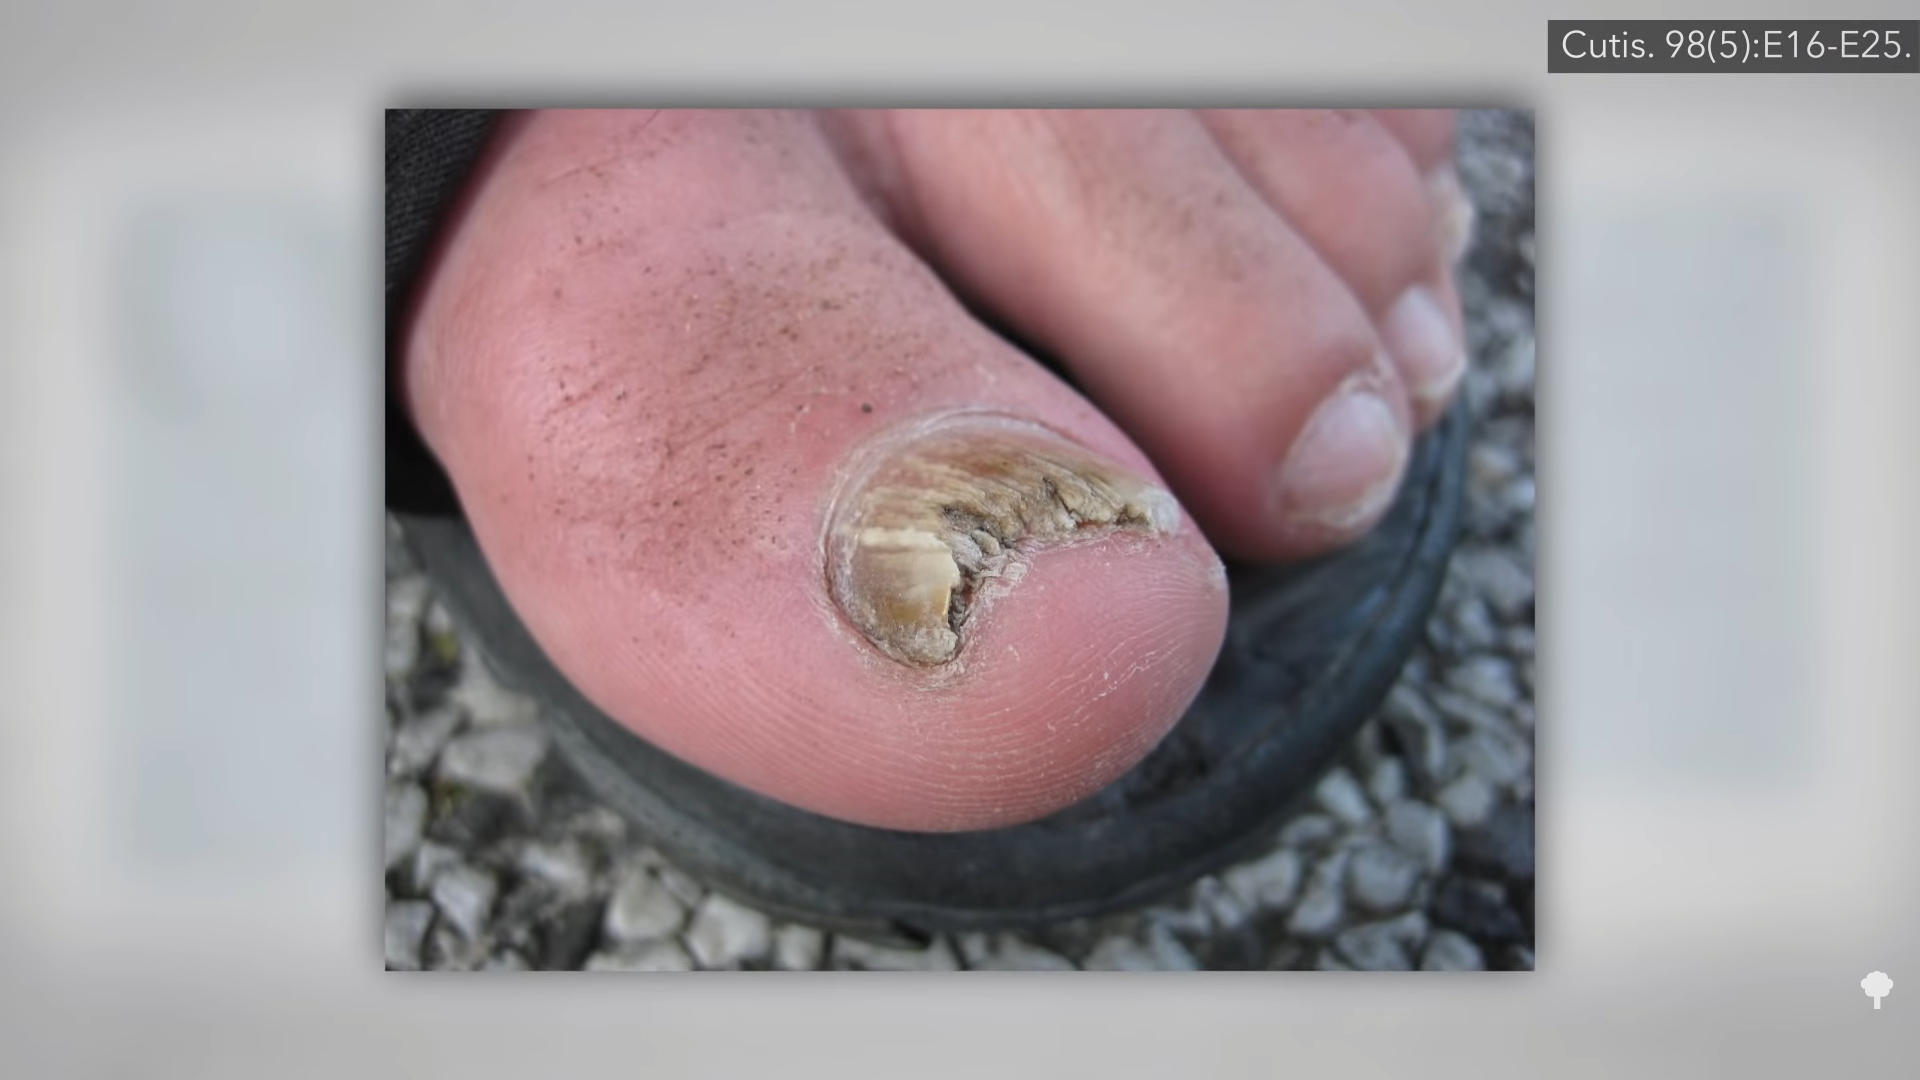 Treating the Root Cause of Toenail Fungus